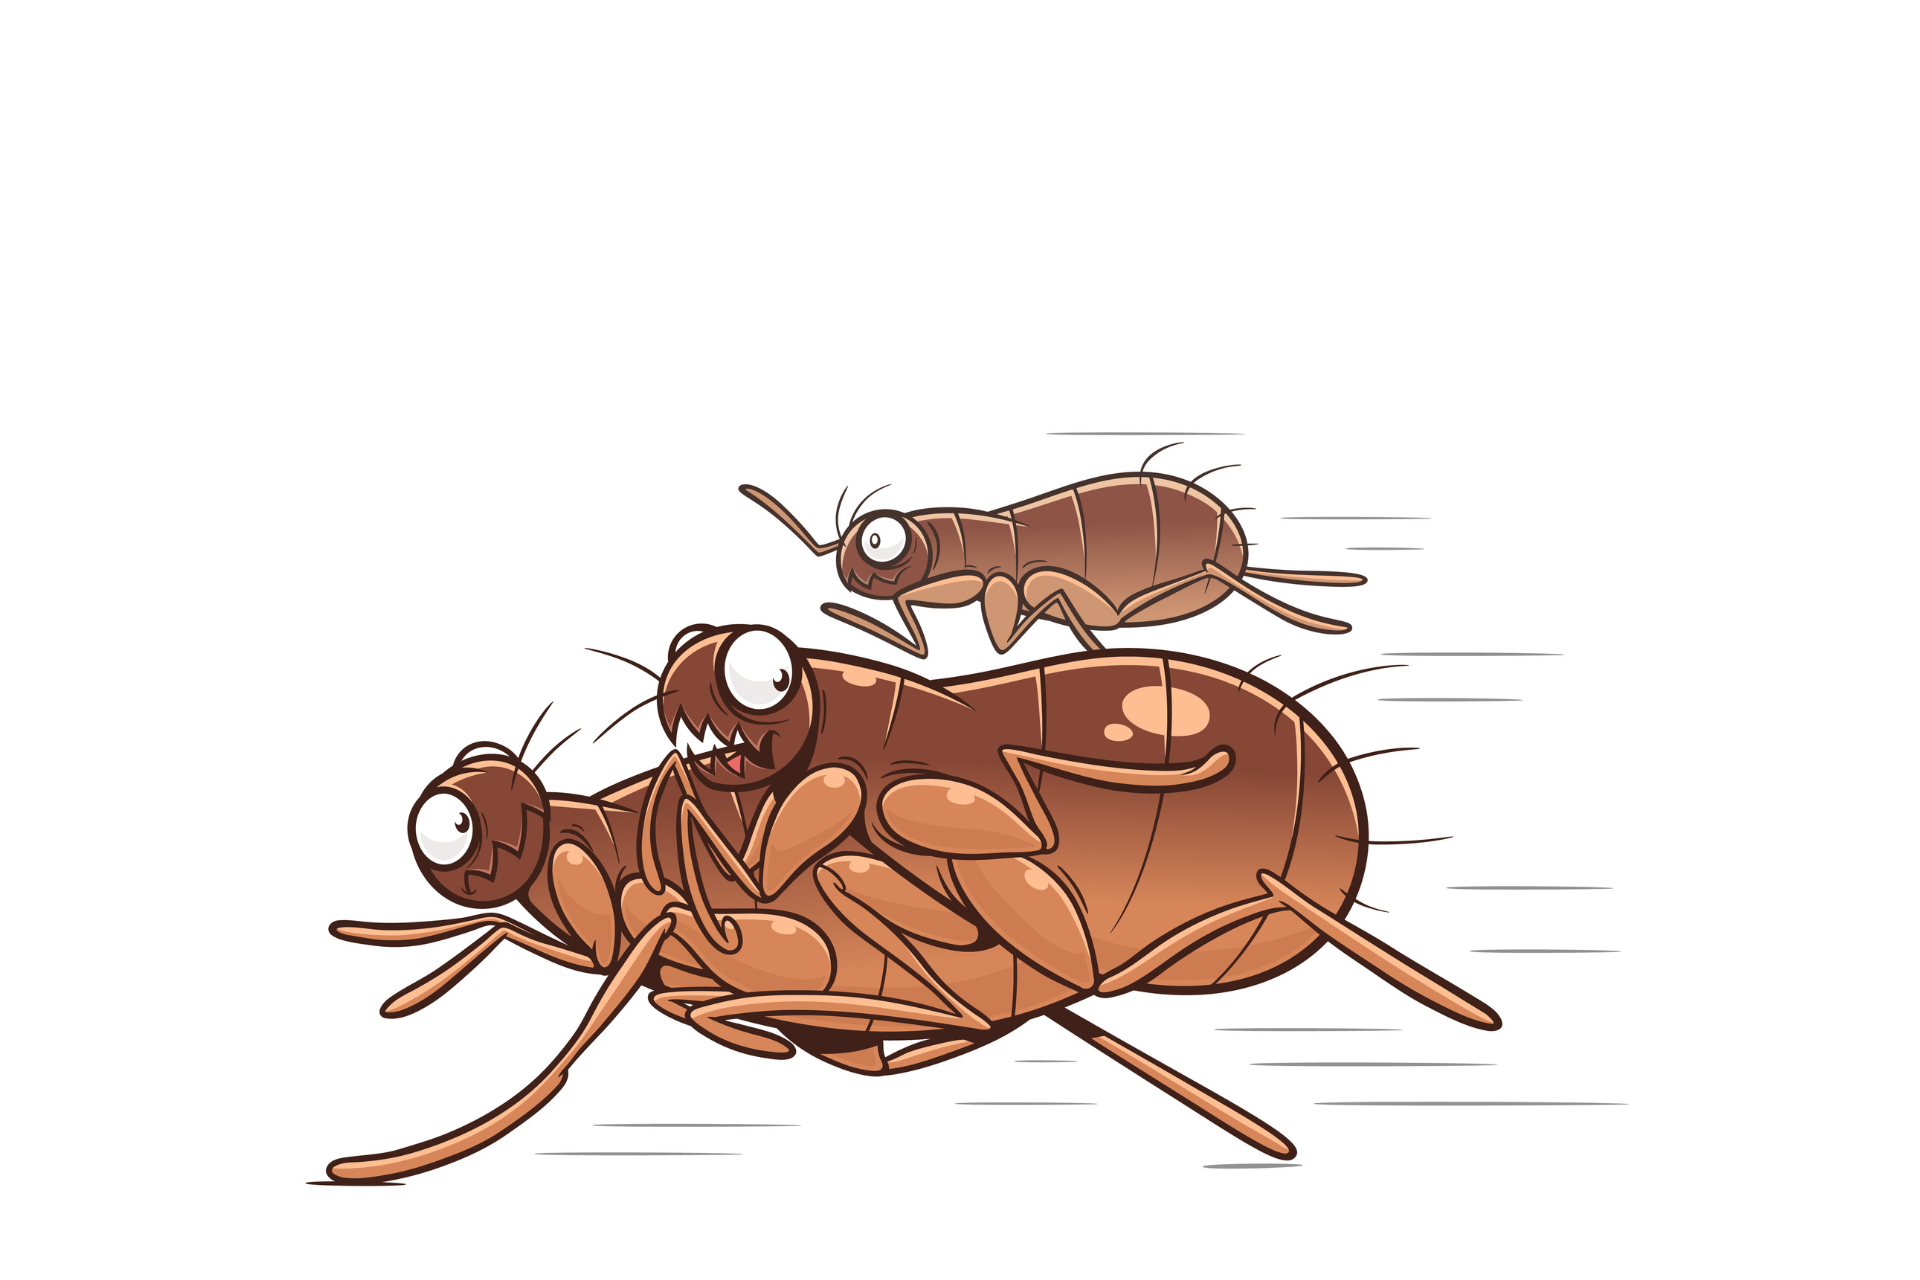 A cartoon illustration of two termites racing each other.